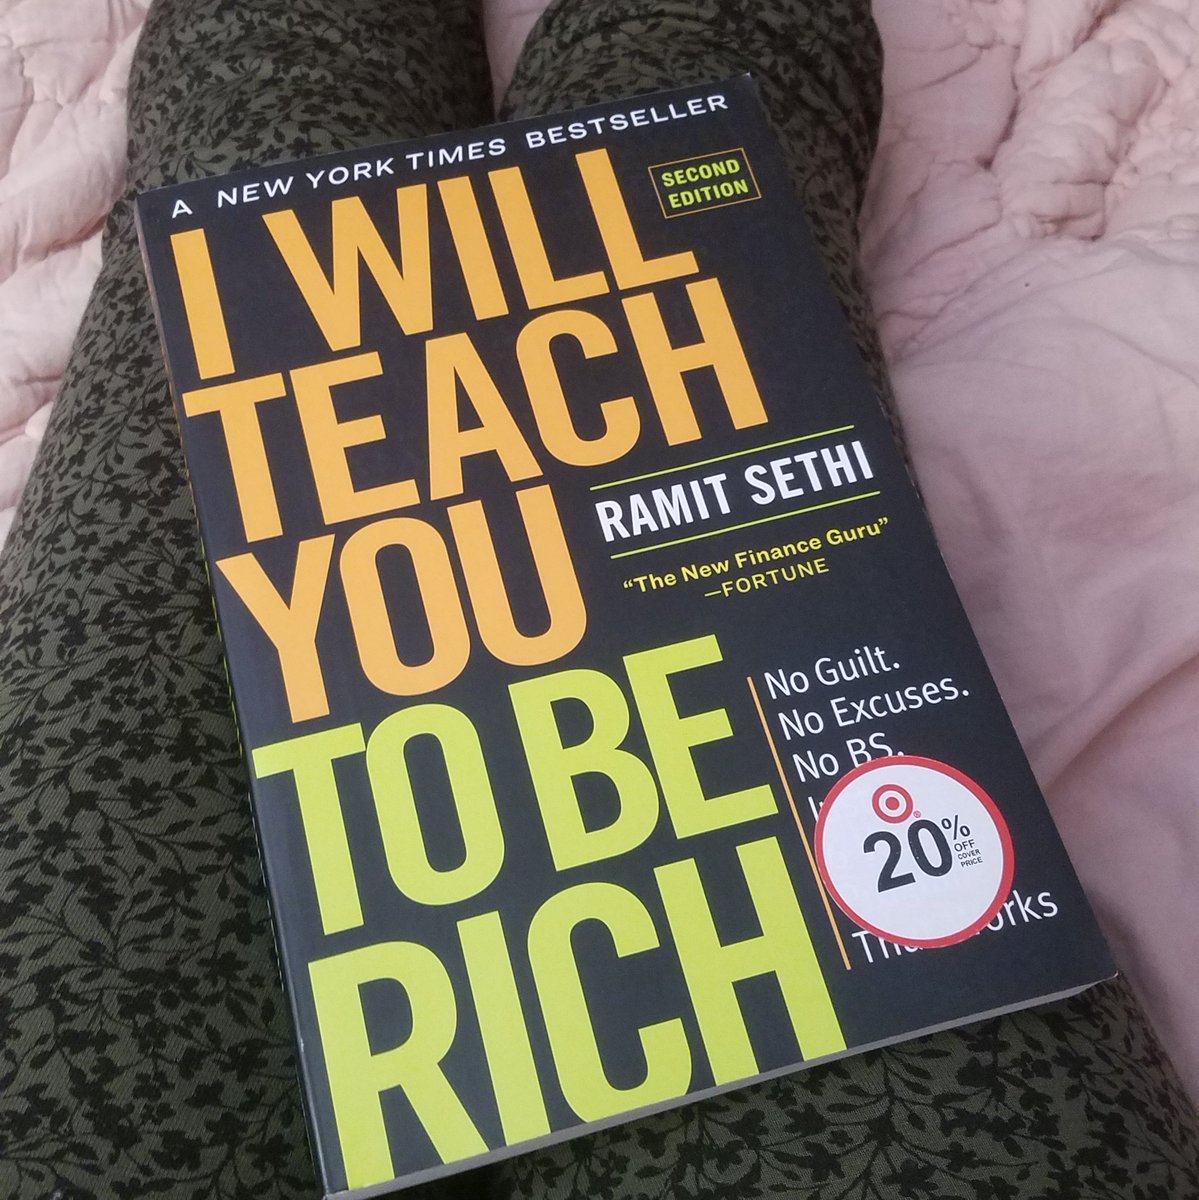 I'm so happy to be home and in my bed reading this book about money, business and psychology.  #iwillteachyoutoberich #ramitsethi